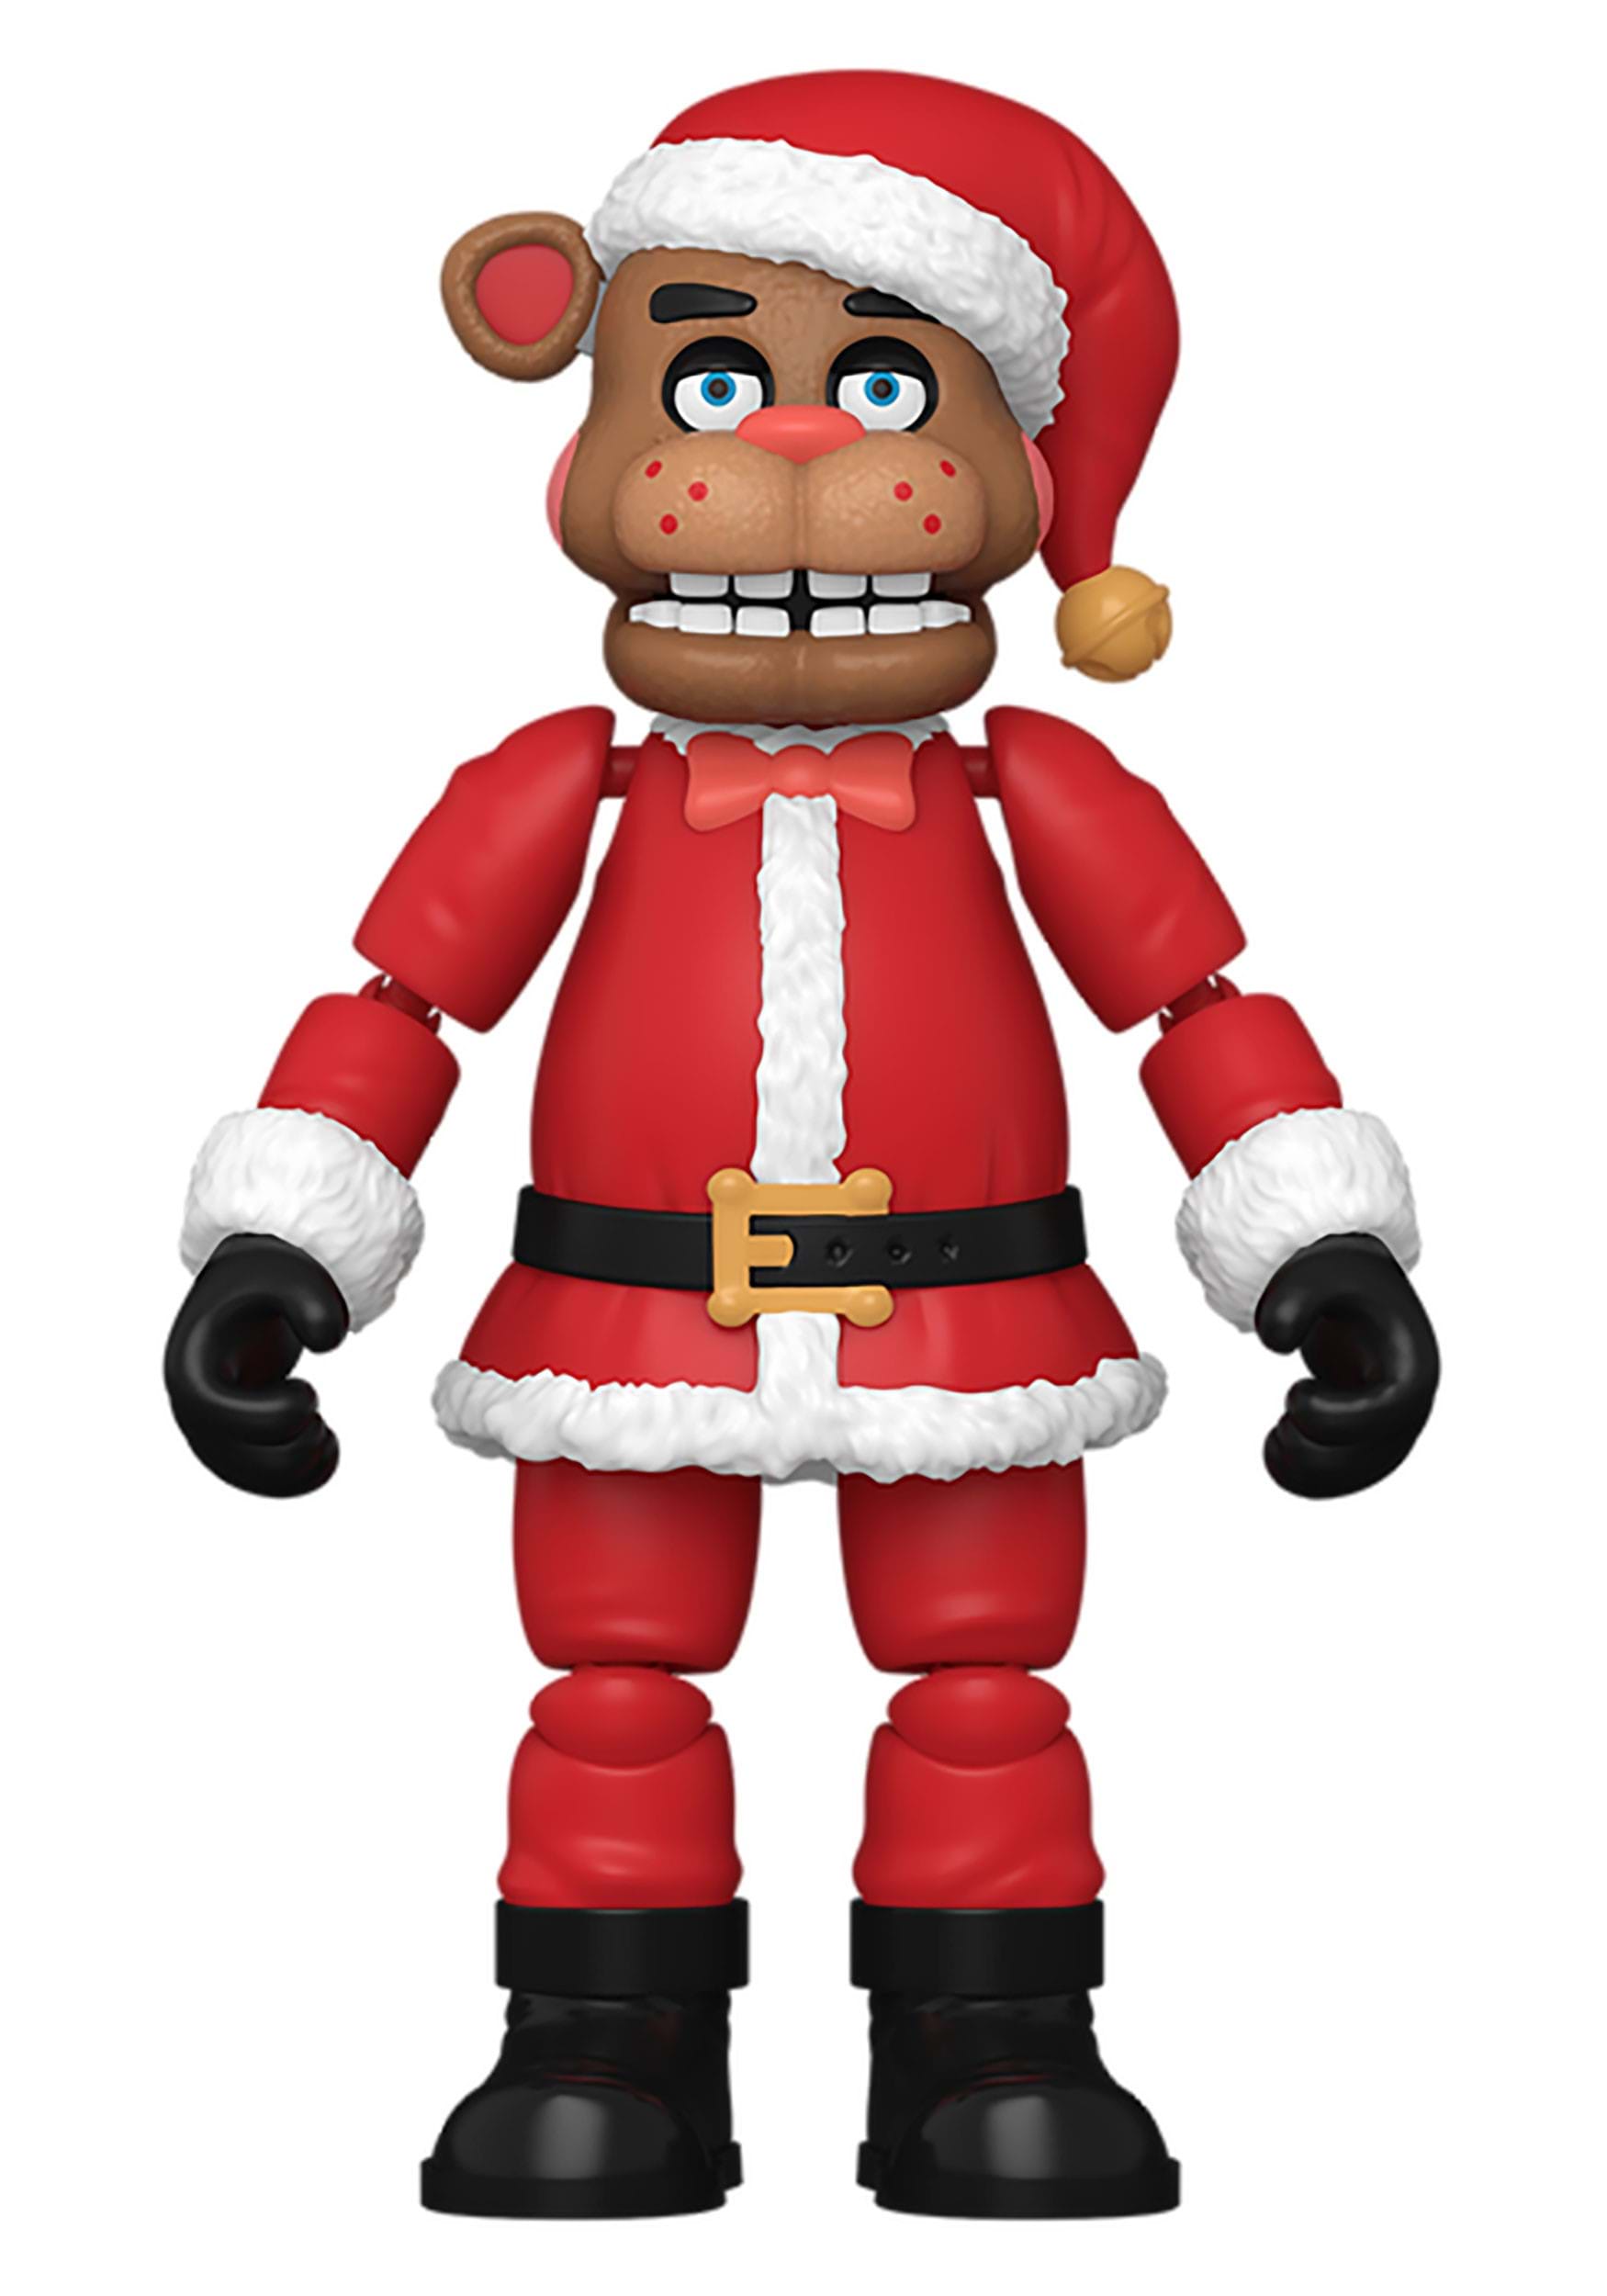 Five Nights at Freddys Santa Freddy Funko Action Figure | Video Game Action Figures